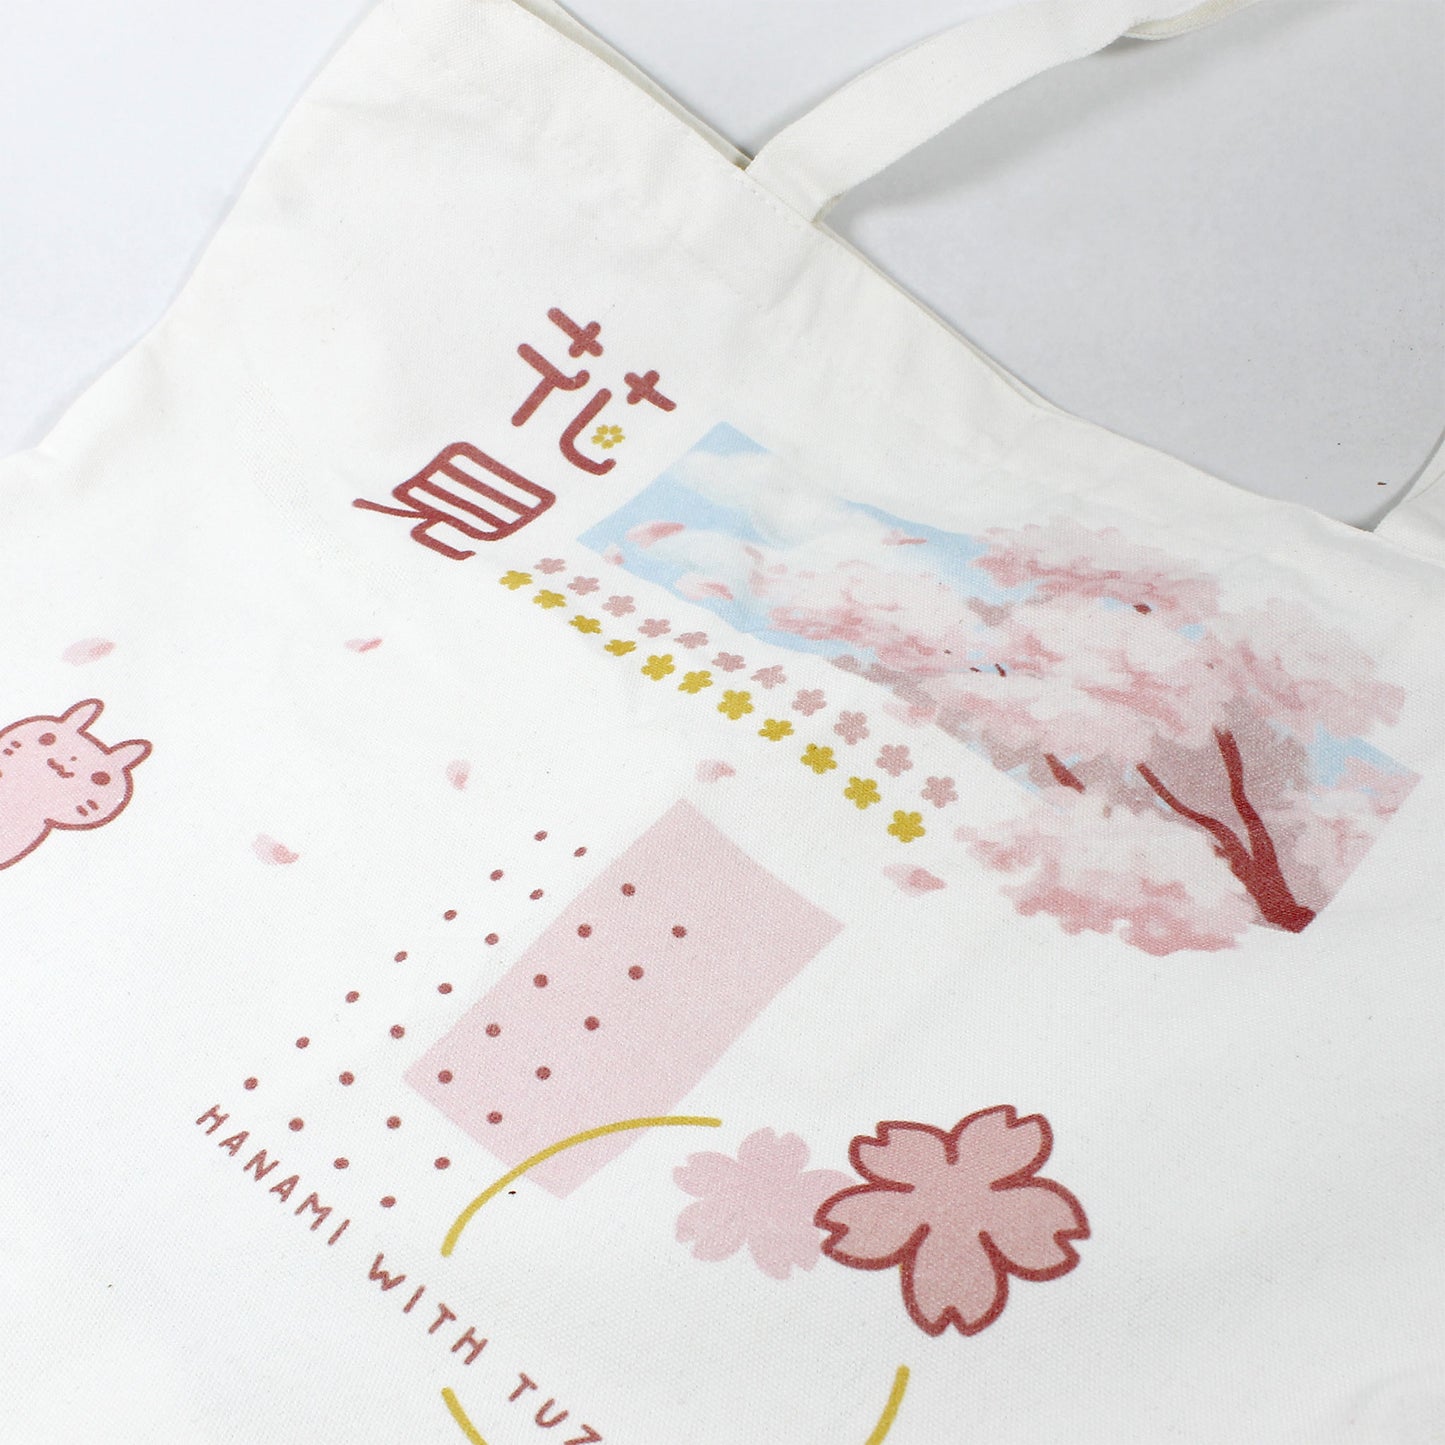 Cherry Blossom "Hanami With Tuzi" Tote Bag With Zipper and Pocket